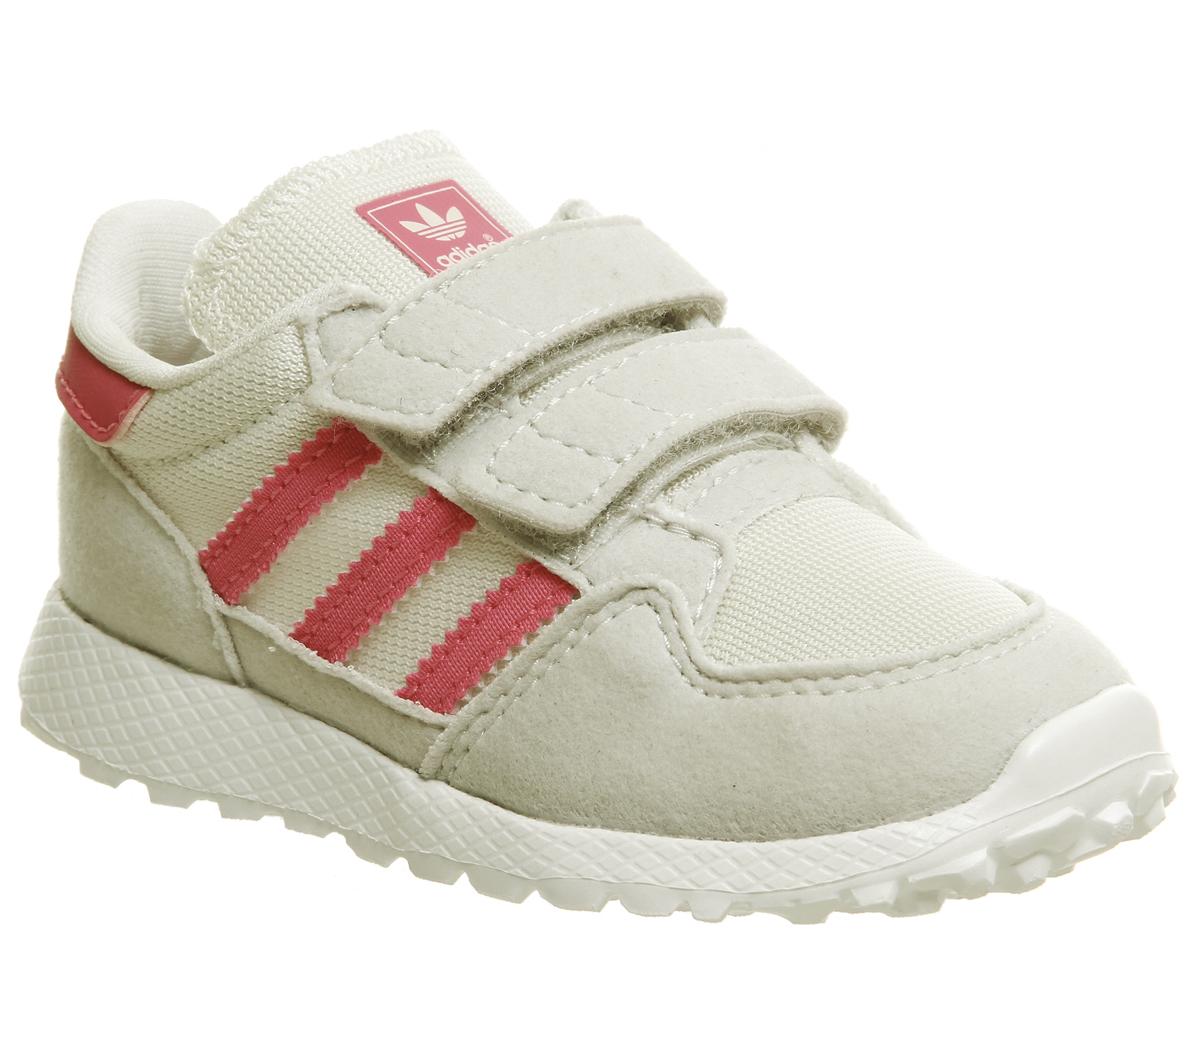 infant size 8.5 trainers